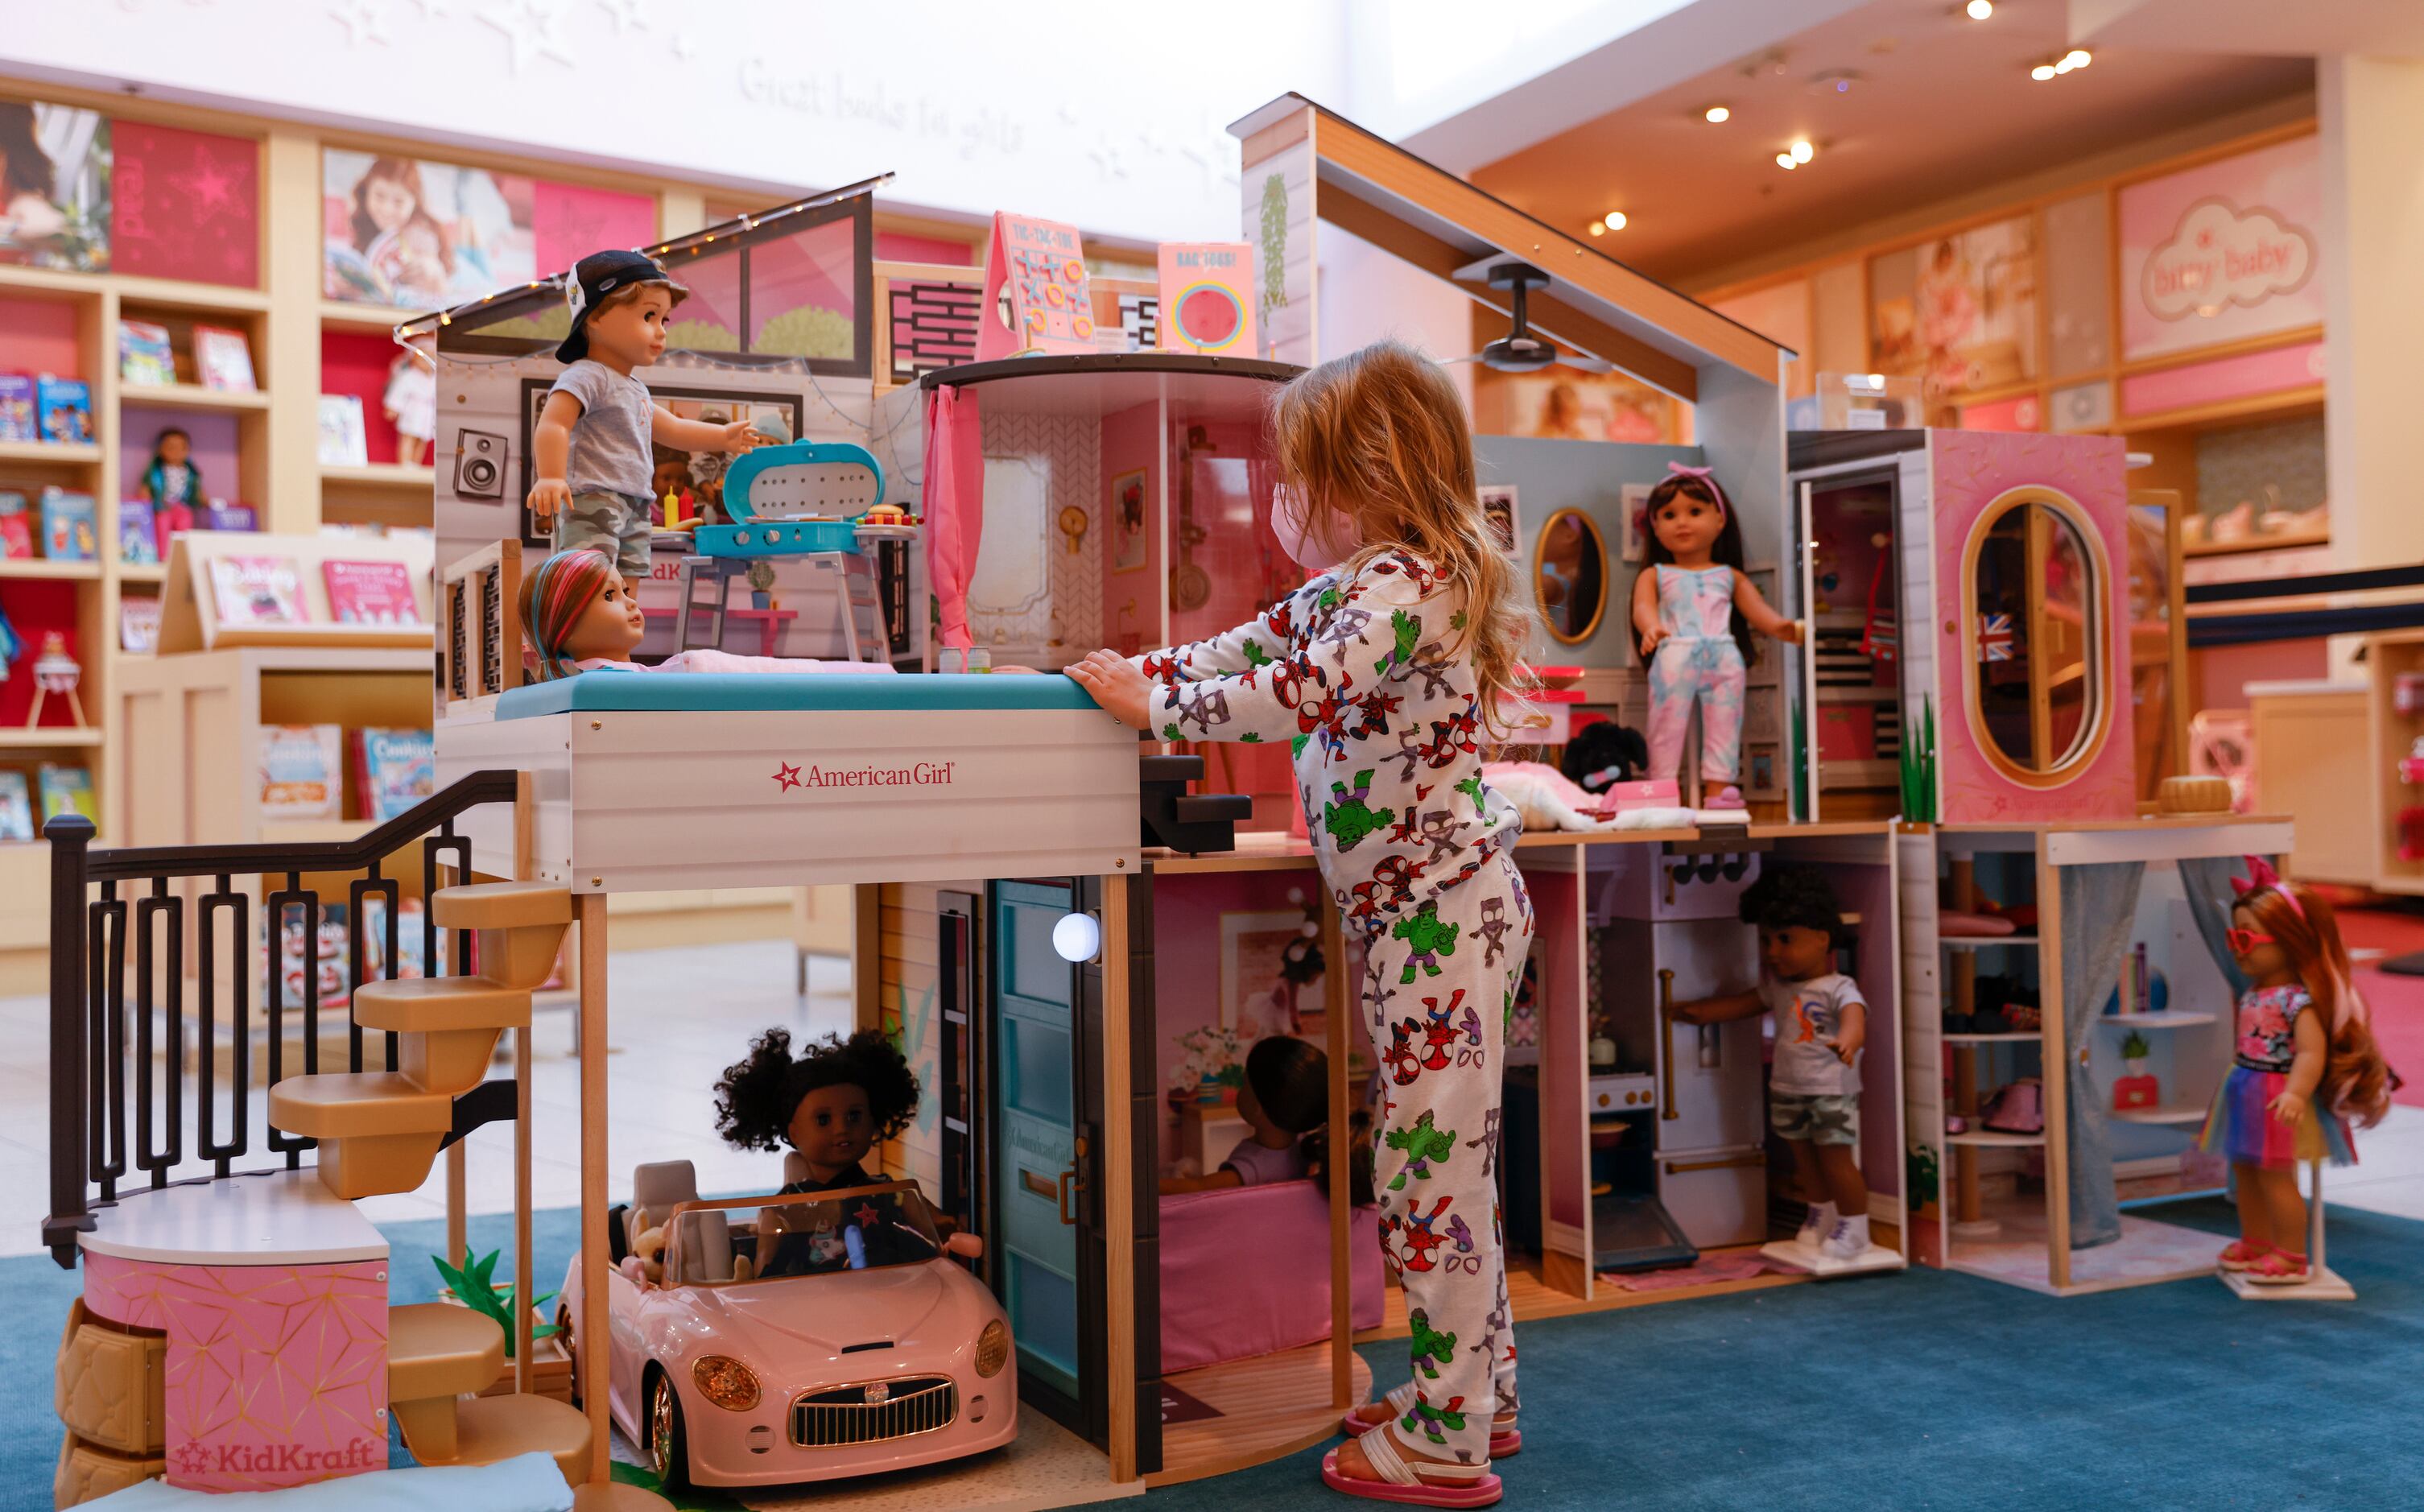 First American Girl dollhouse comes with a hot tub, fireplace and